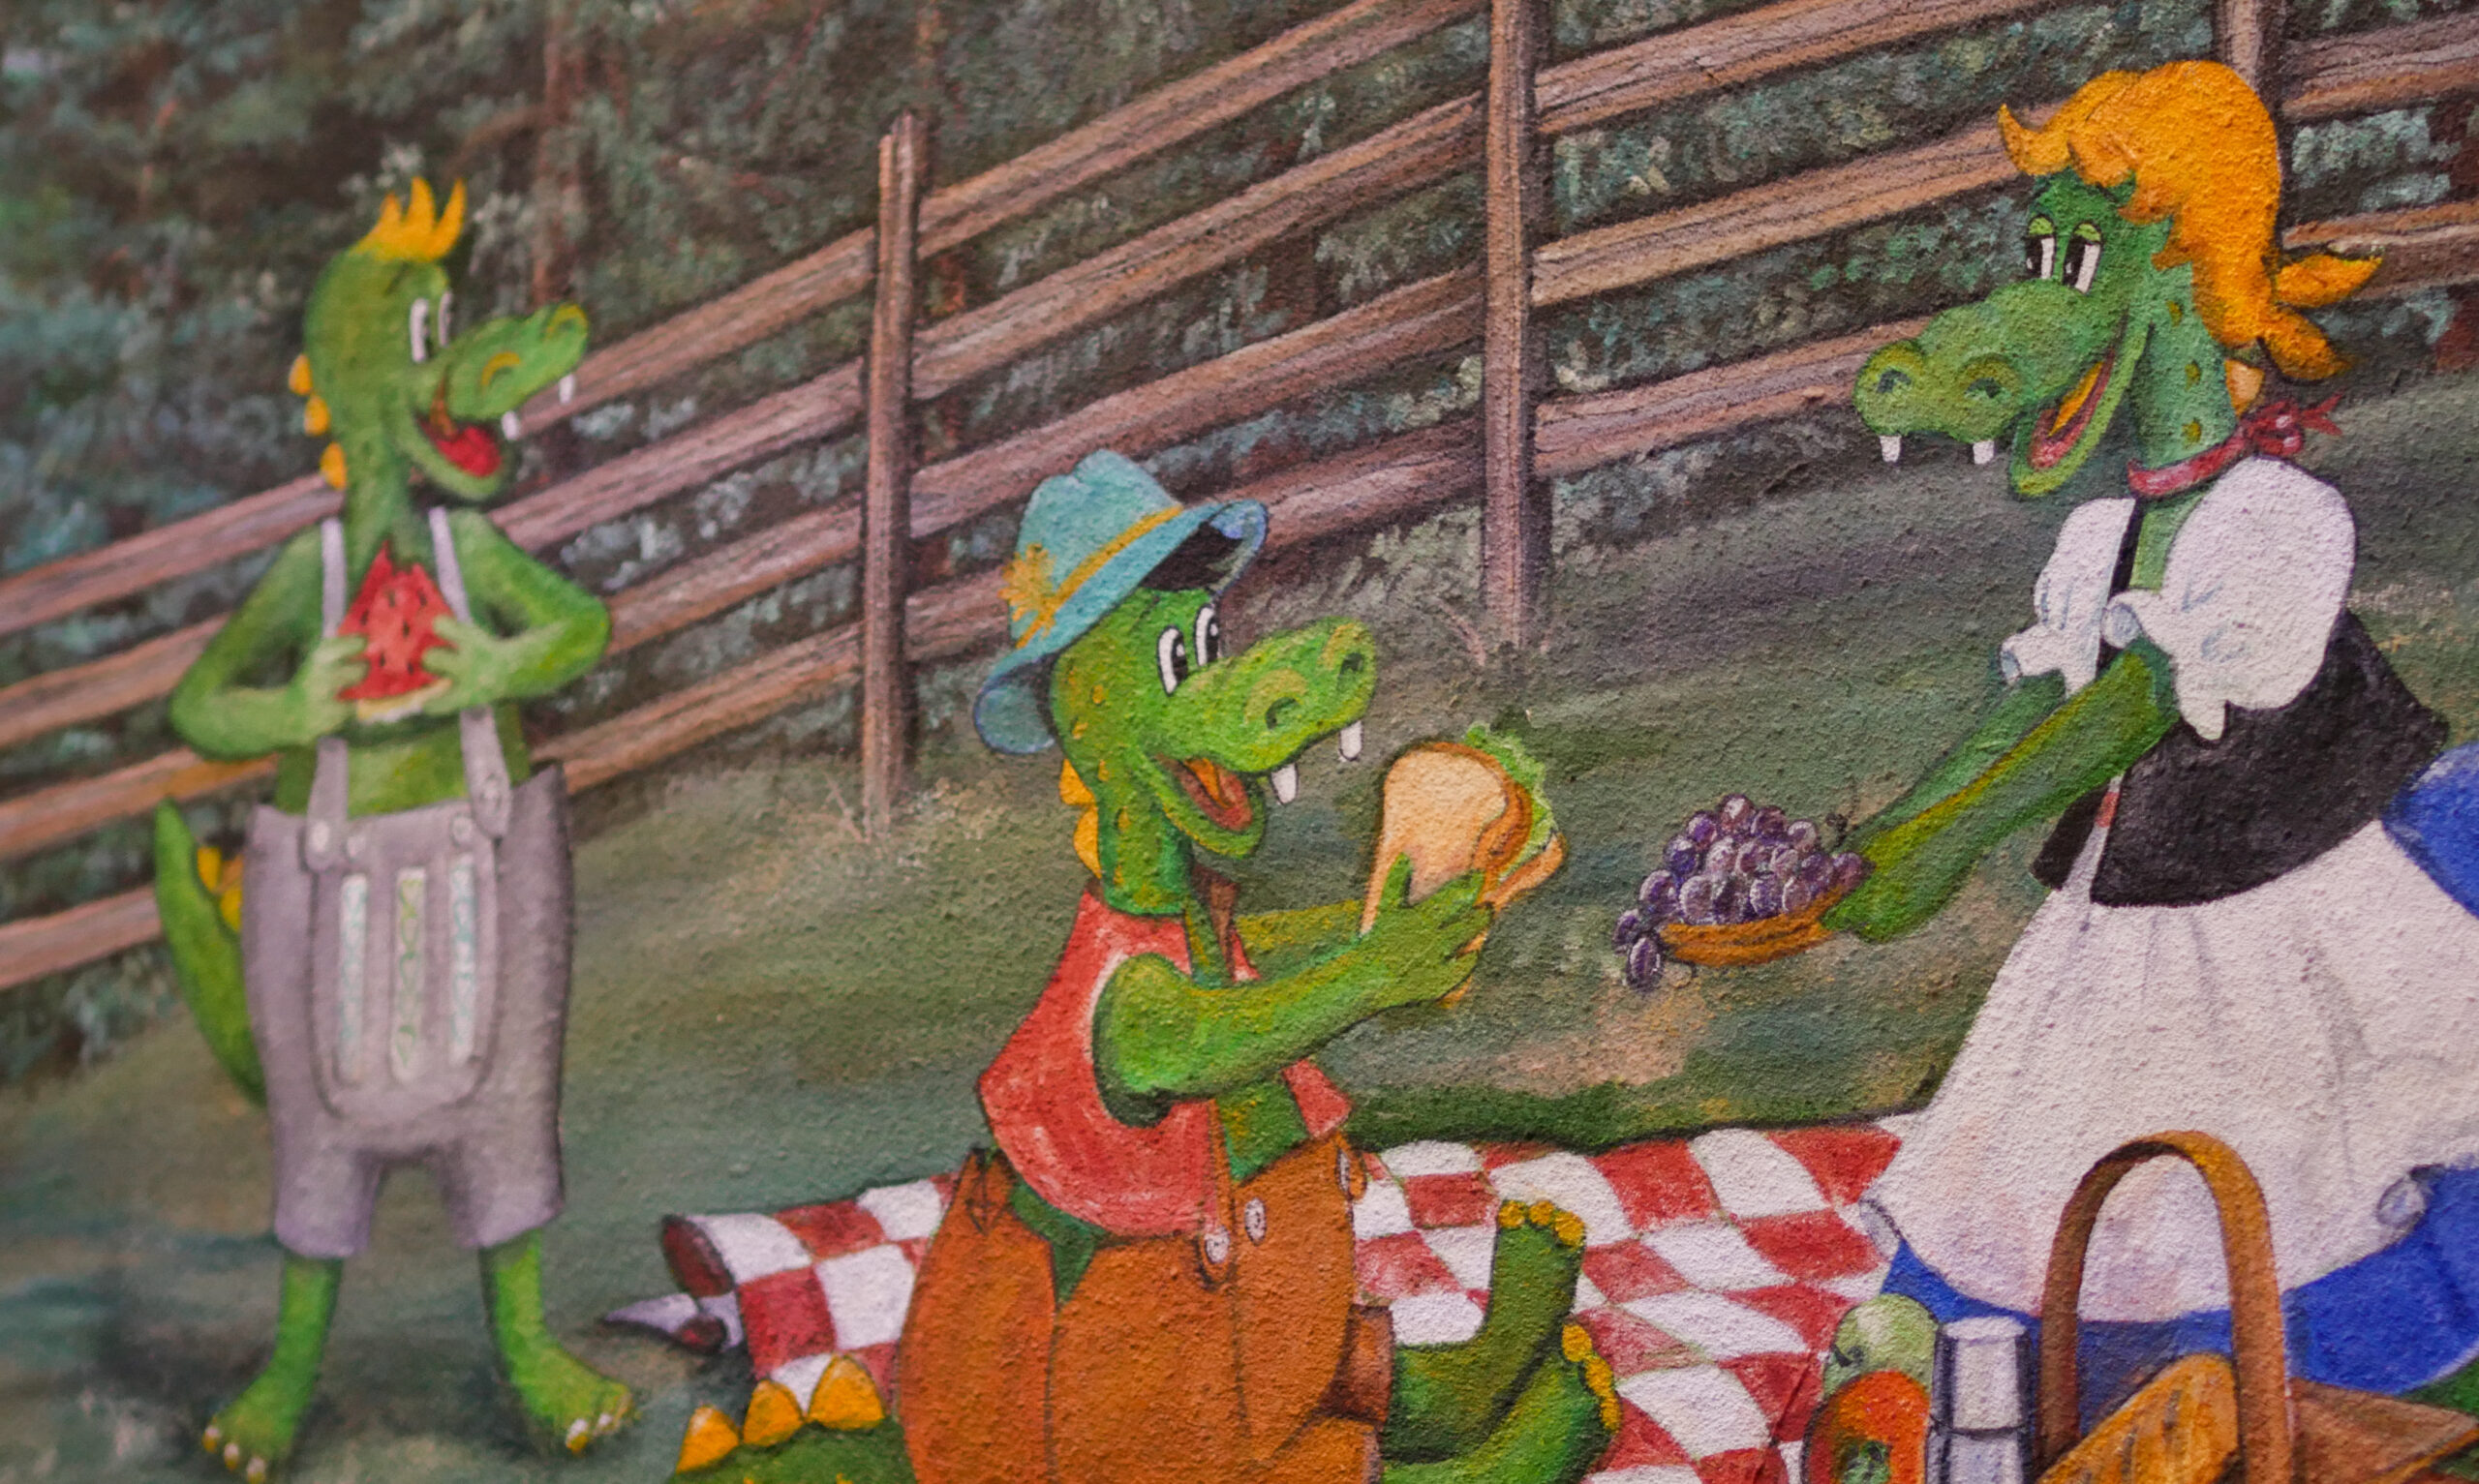 7 Facts You May Not Know About Willy the Dragon